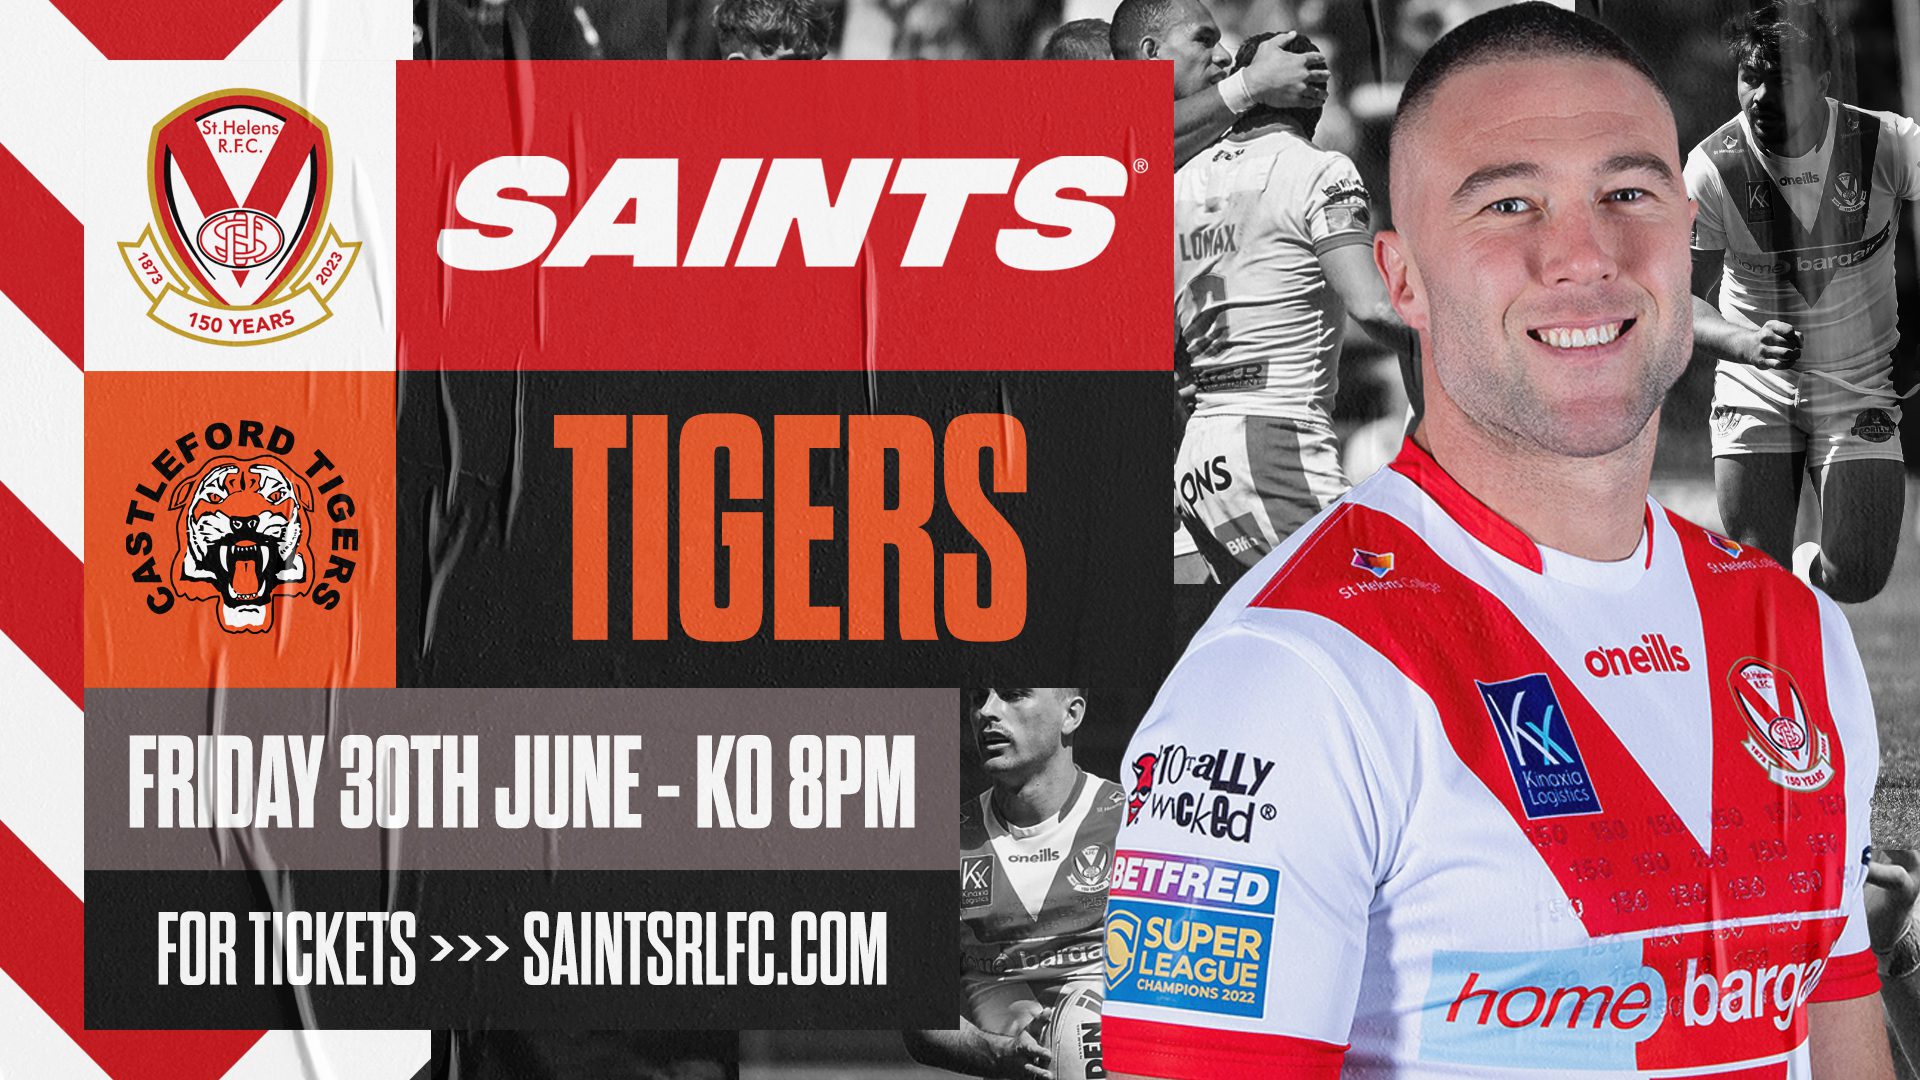 Next up at home Castleford Tigers St.Helens R.F.C.